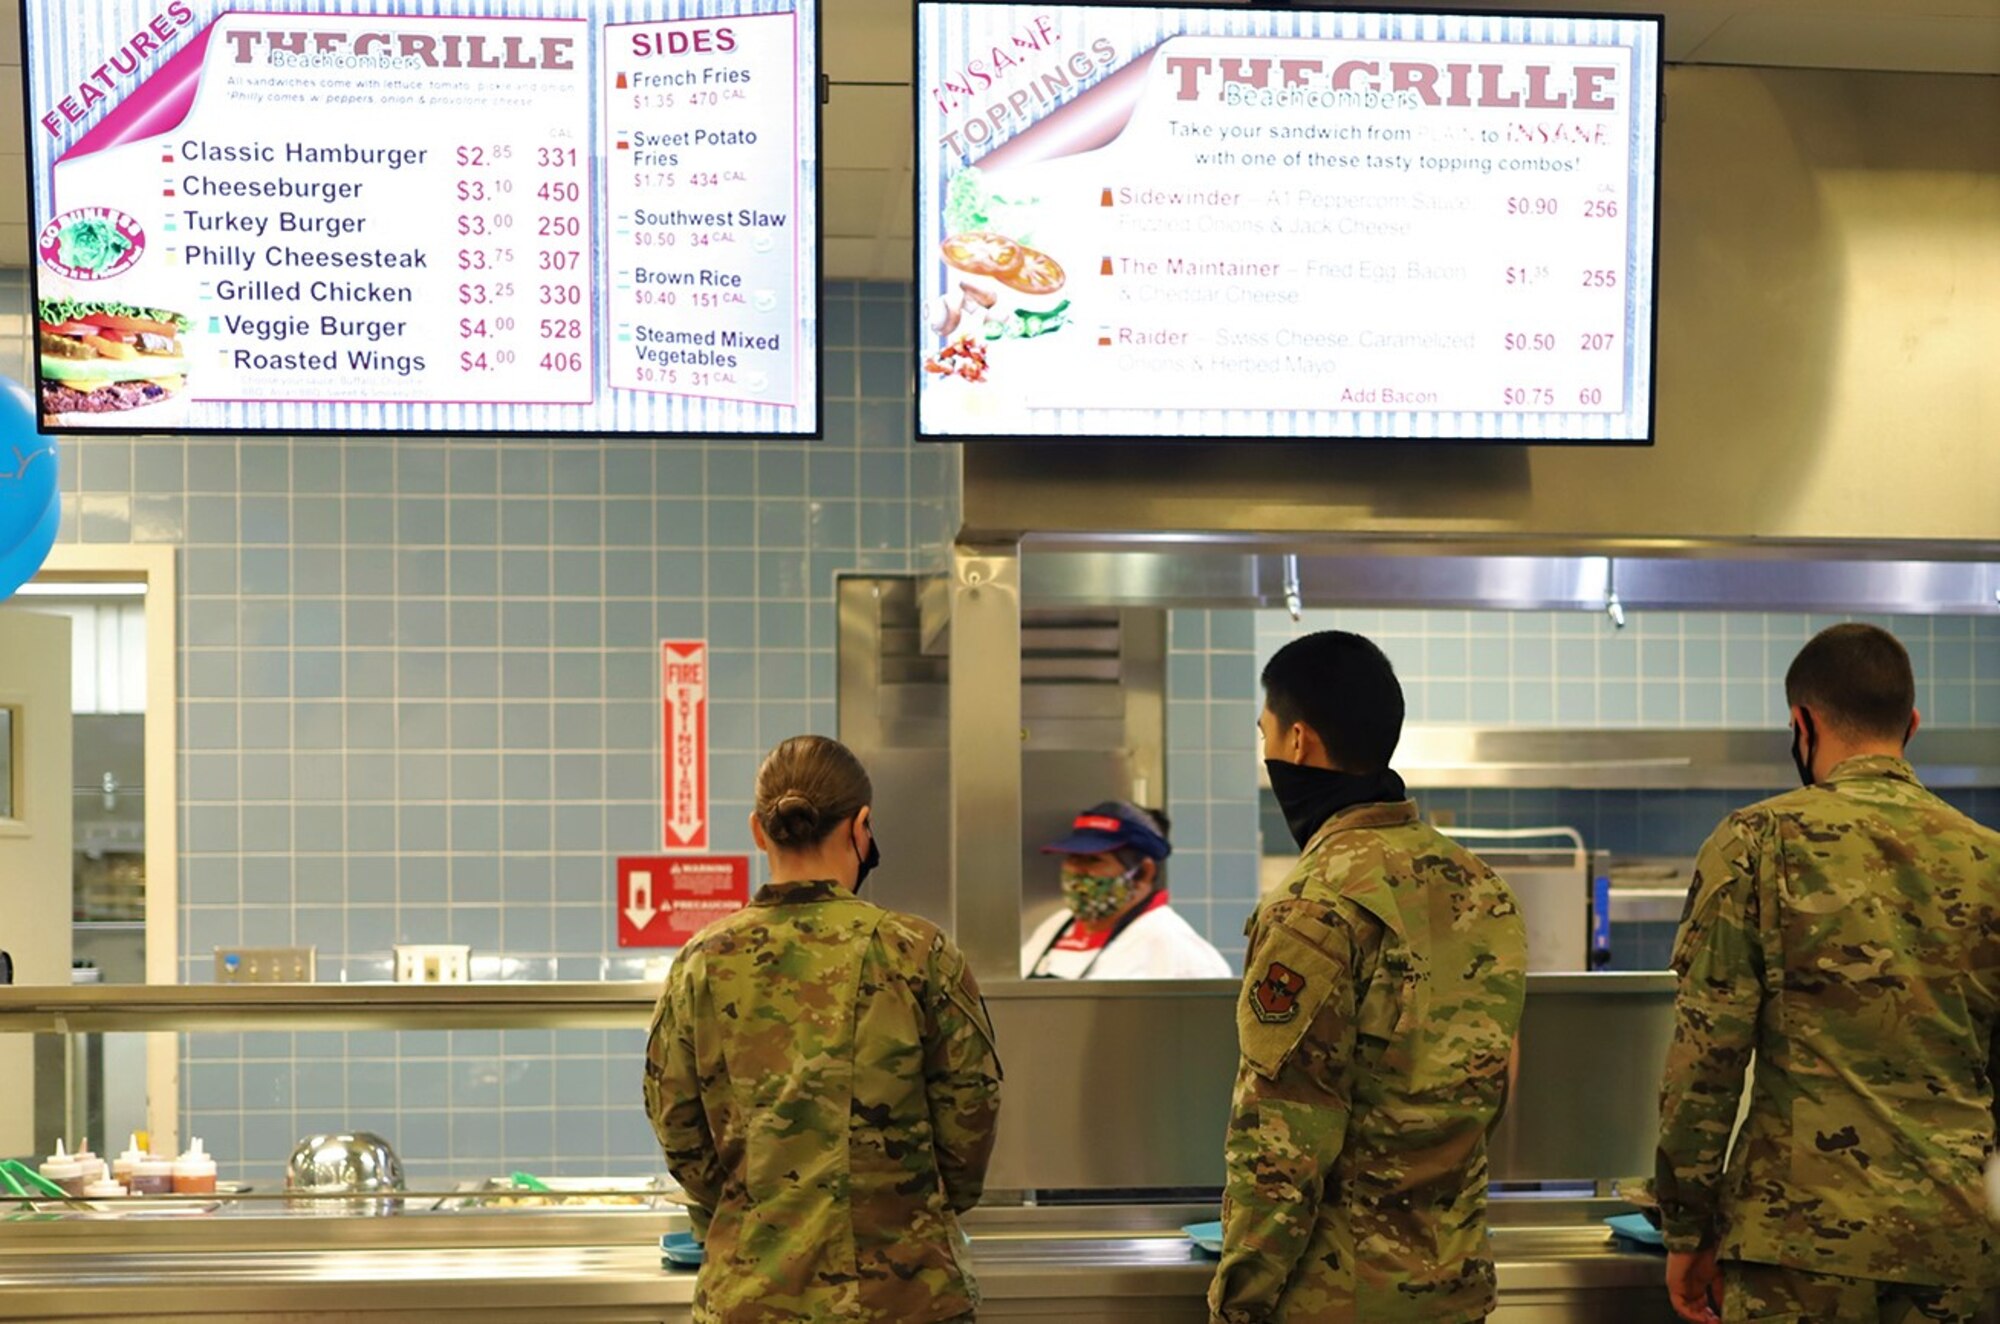 Students line up for lunch at the grille station inside the newly reopened The Beachcombers dining facility at Vandenberg AFB, California, Aug. 6, 2020.